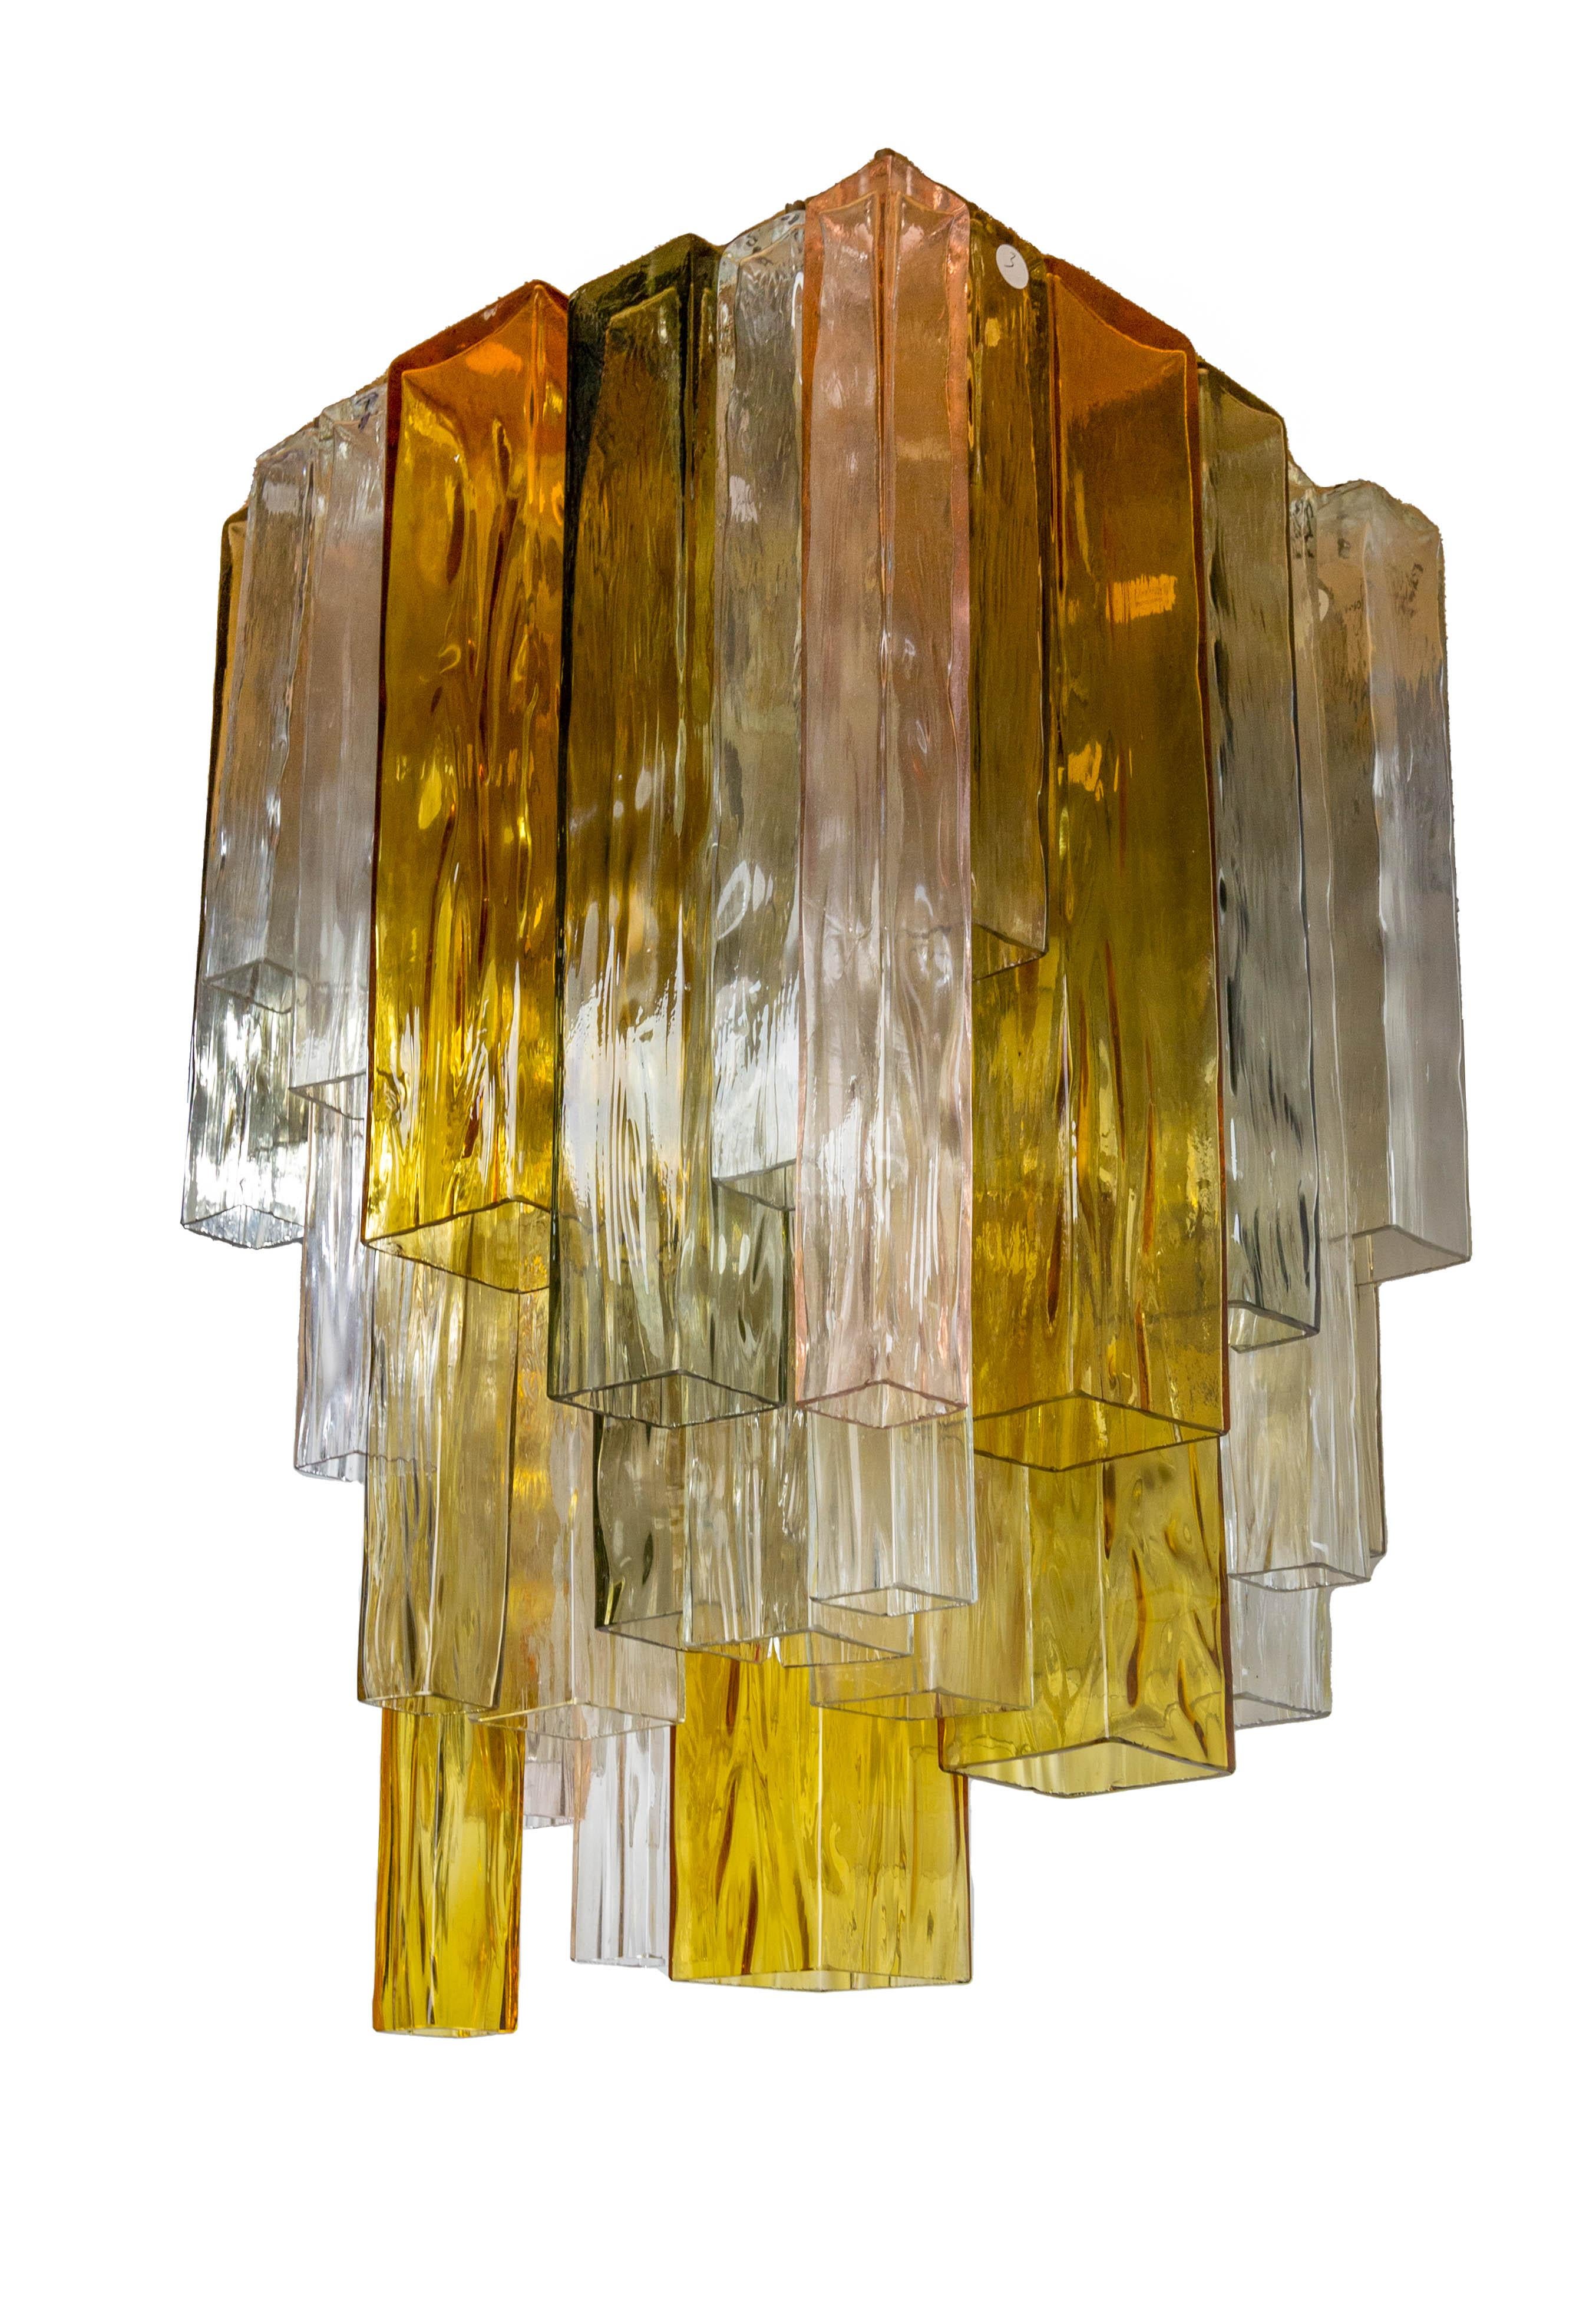 Barovier & Toso Murano Venini rare four-color glass chandelier stunning and impressive
with its original label on the top of flush mount, Barovier and Toso.
We understand that this came from an Hotel in Monaco that was being re furbished.
Flush